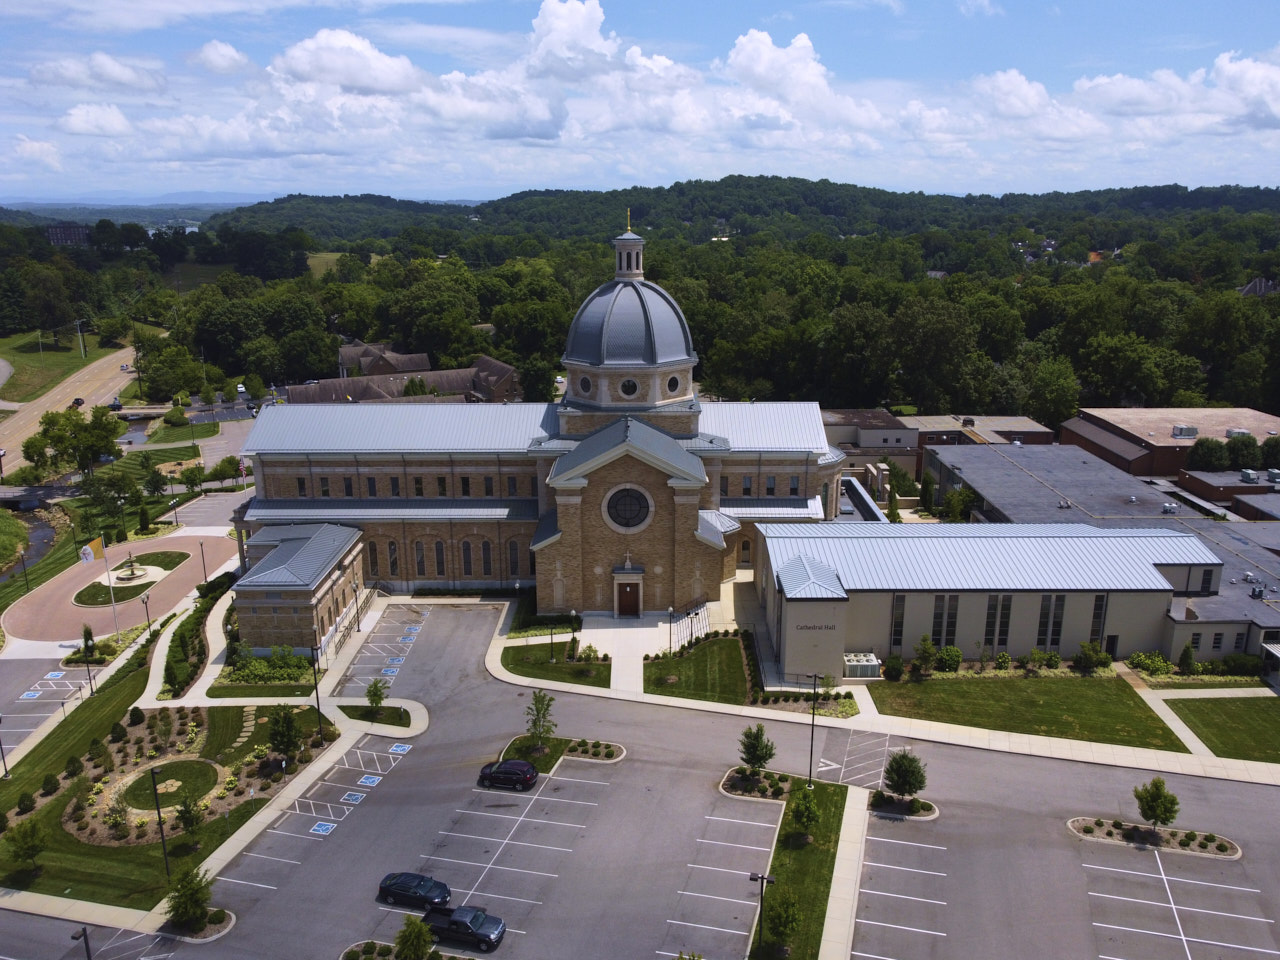 The Cathedral of the Most Sacred Heart of Jesus is a cathedral and parish church located in Knoxville, Tennessee, United States. It is the seat of the Catholic Diocese of Knoxville. The original cathedral church was completed in 1956 and the present church was completed in 2018.